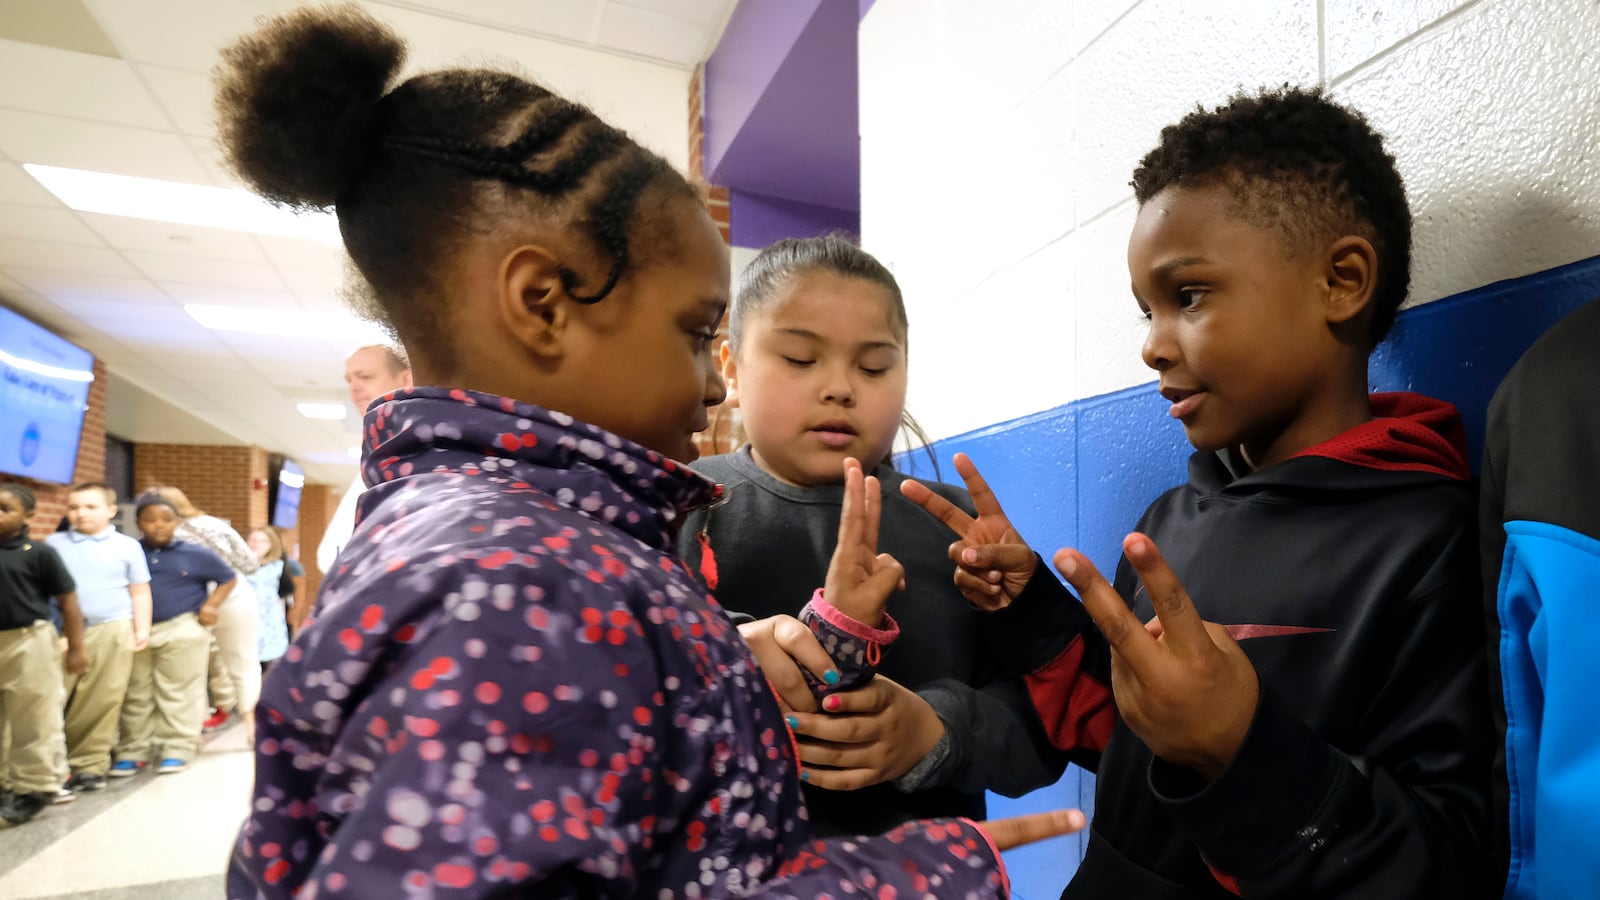 Students interact with one another before class at Thomas Gregg Neighborhood School, an elementary school in Indianapolis, Indiana.